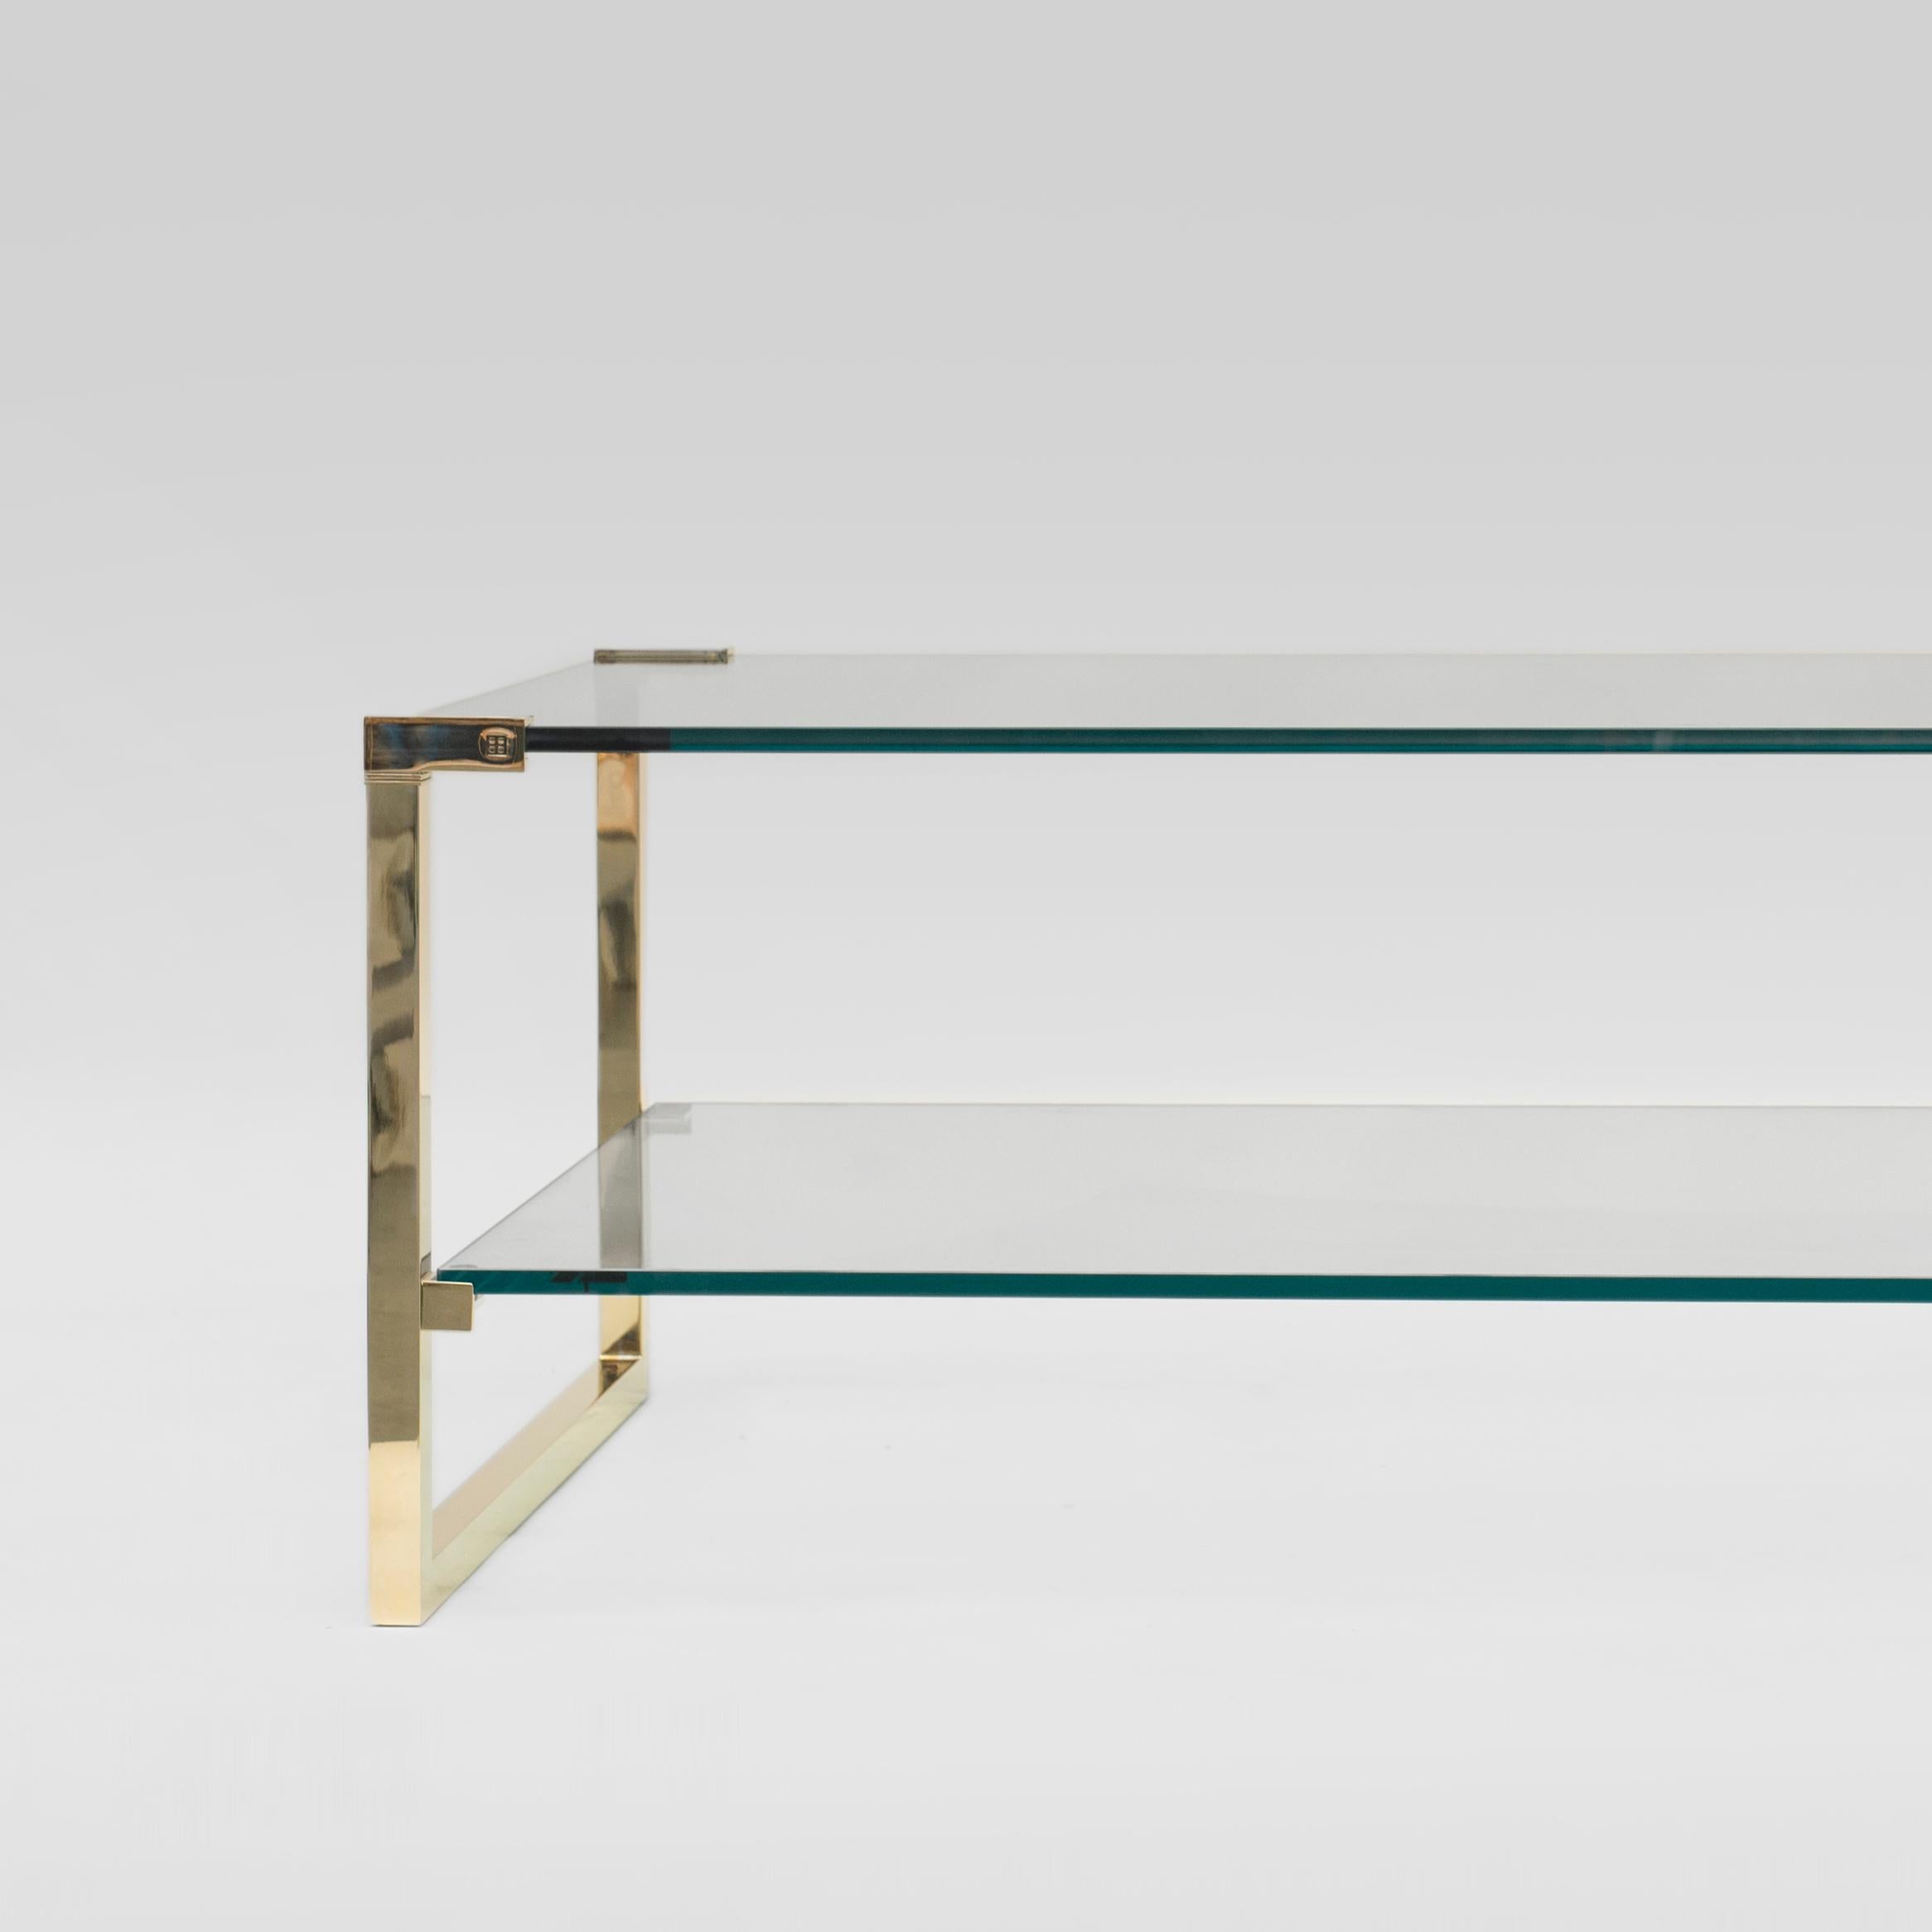 Contemporary coffee table designed by Peter Ghyczy.
Manufactured by Ghyczy (Netherlands)

Frame brass gloss
Cast part brass gloss
Clear glass

Dimensions:
L 140 x W 70 x H 50
Dimensions cast part
L 9 x W 3x H 3

The twin frames are